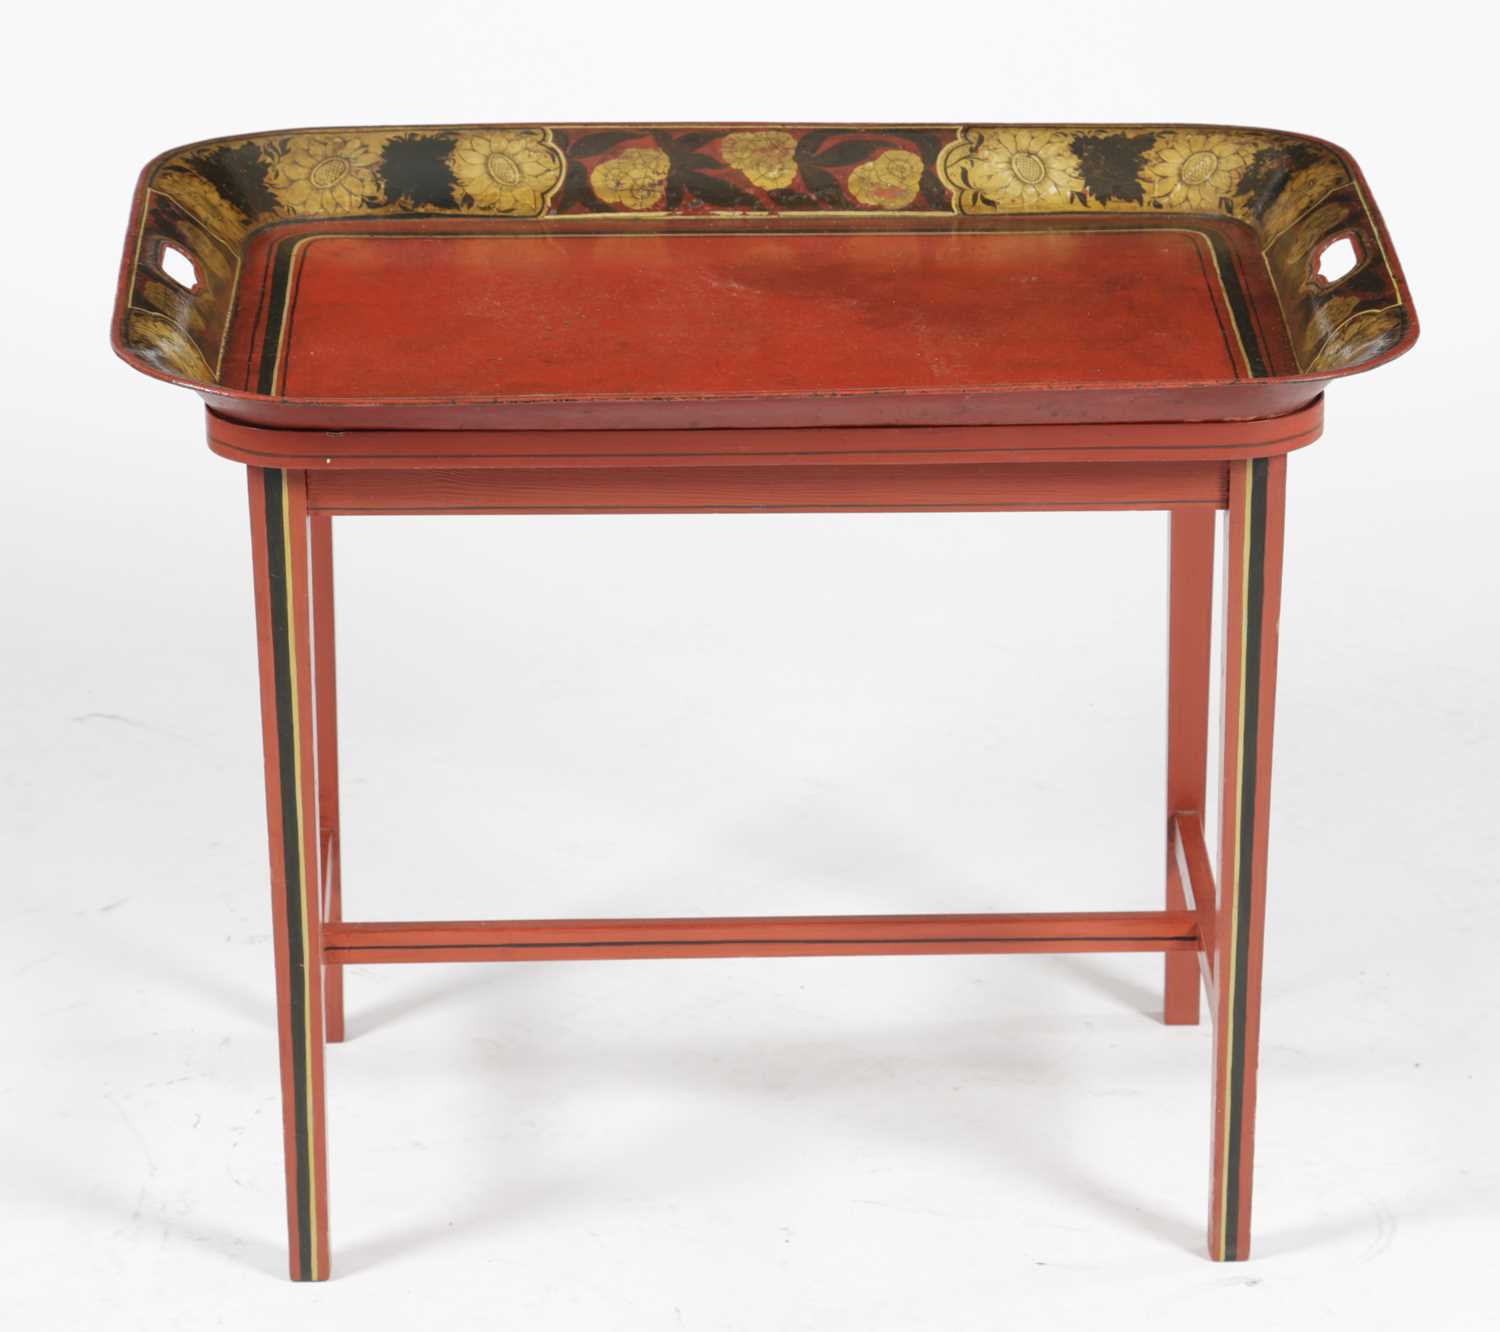 A REGENCY RED TÔLE PEINTE TRAY TABLE EARLY 19TH CENTURY AND LATER painted with a band of flowers and - Image 3 of 3